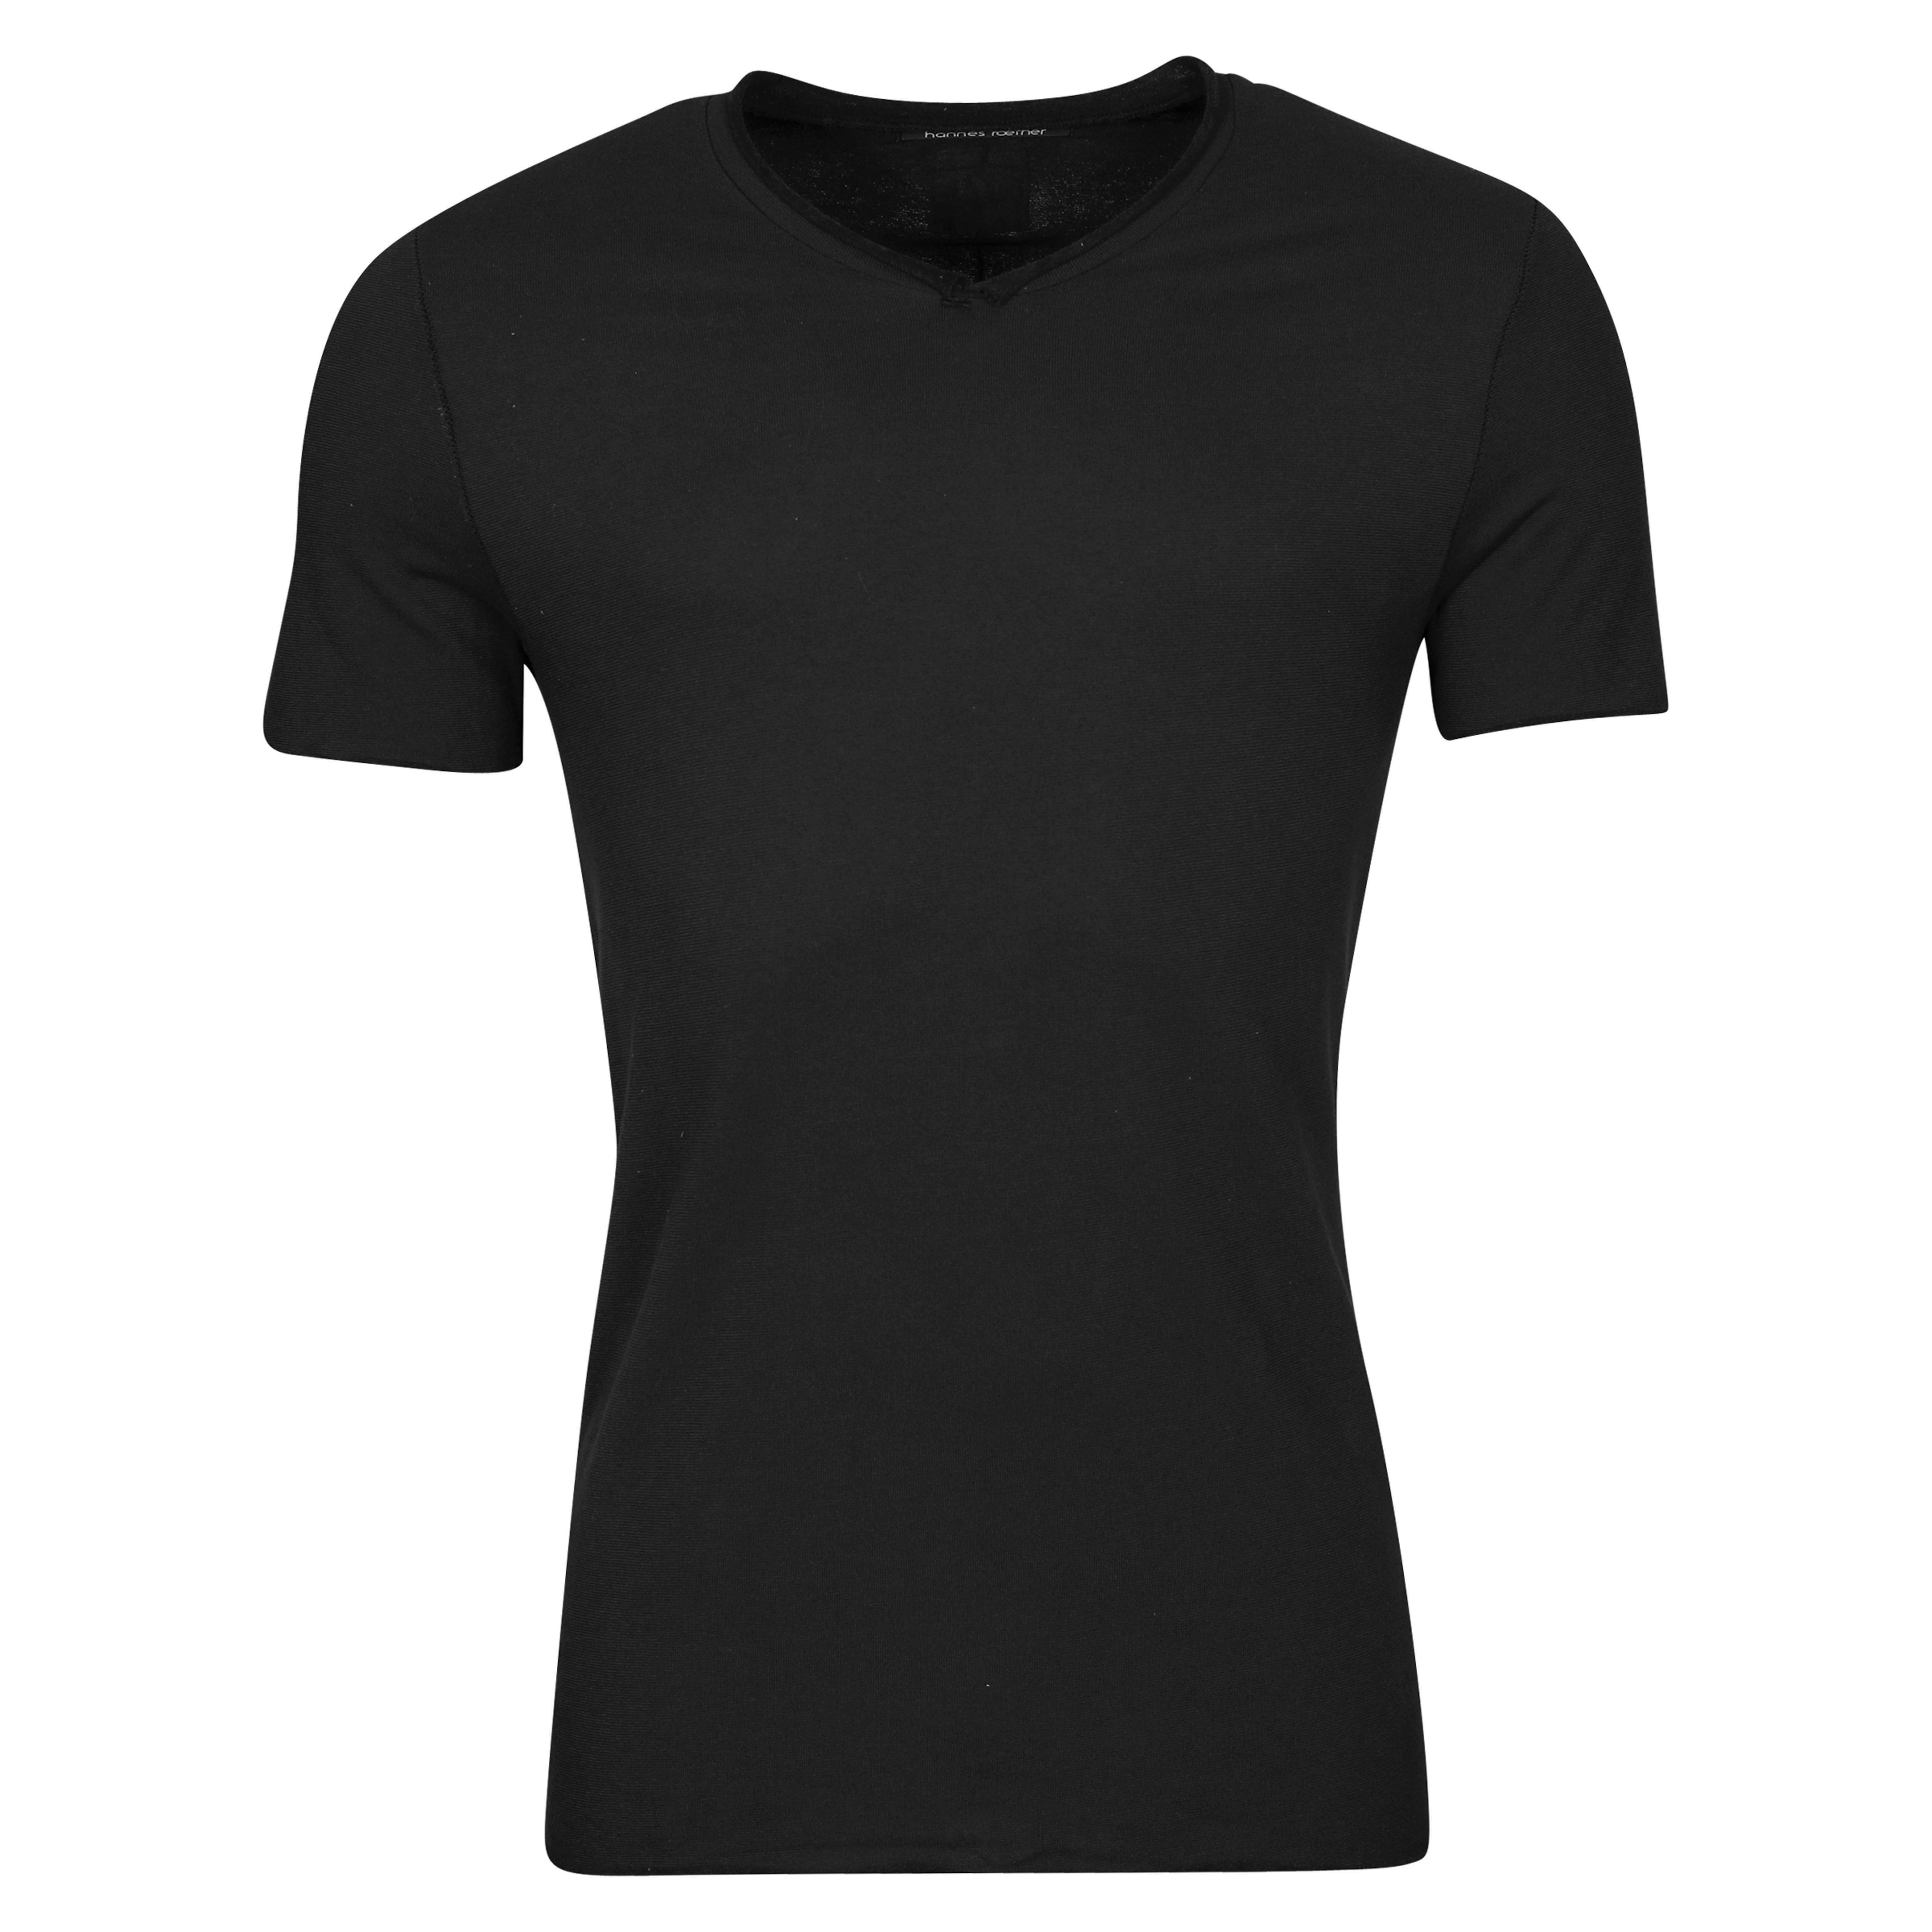 Hannes Roether Frottee V-Neck T-Shirt in Black